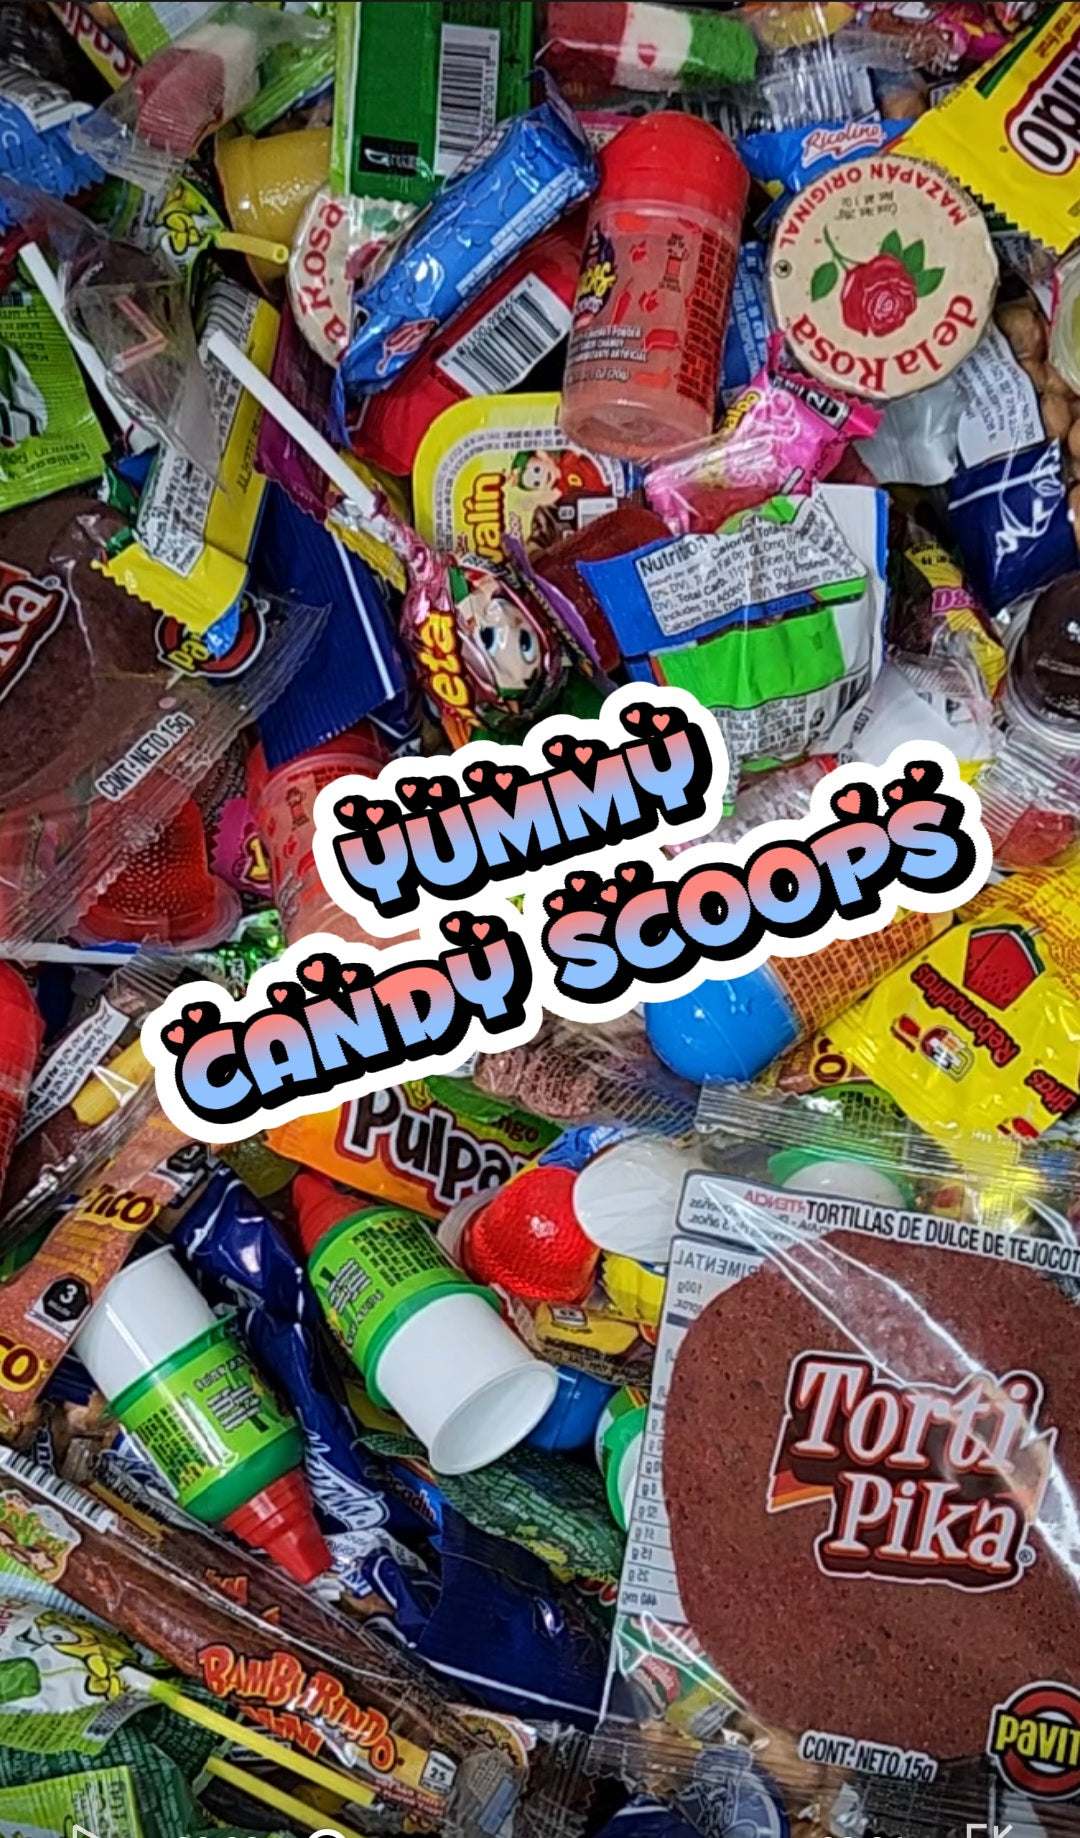 CANDY SCOOPS